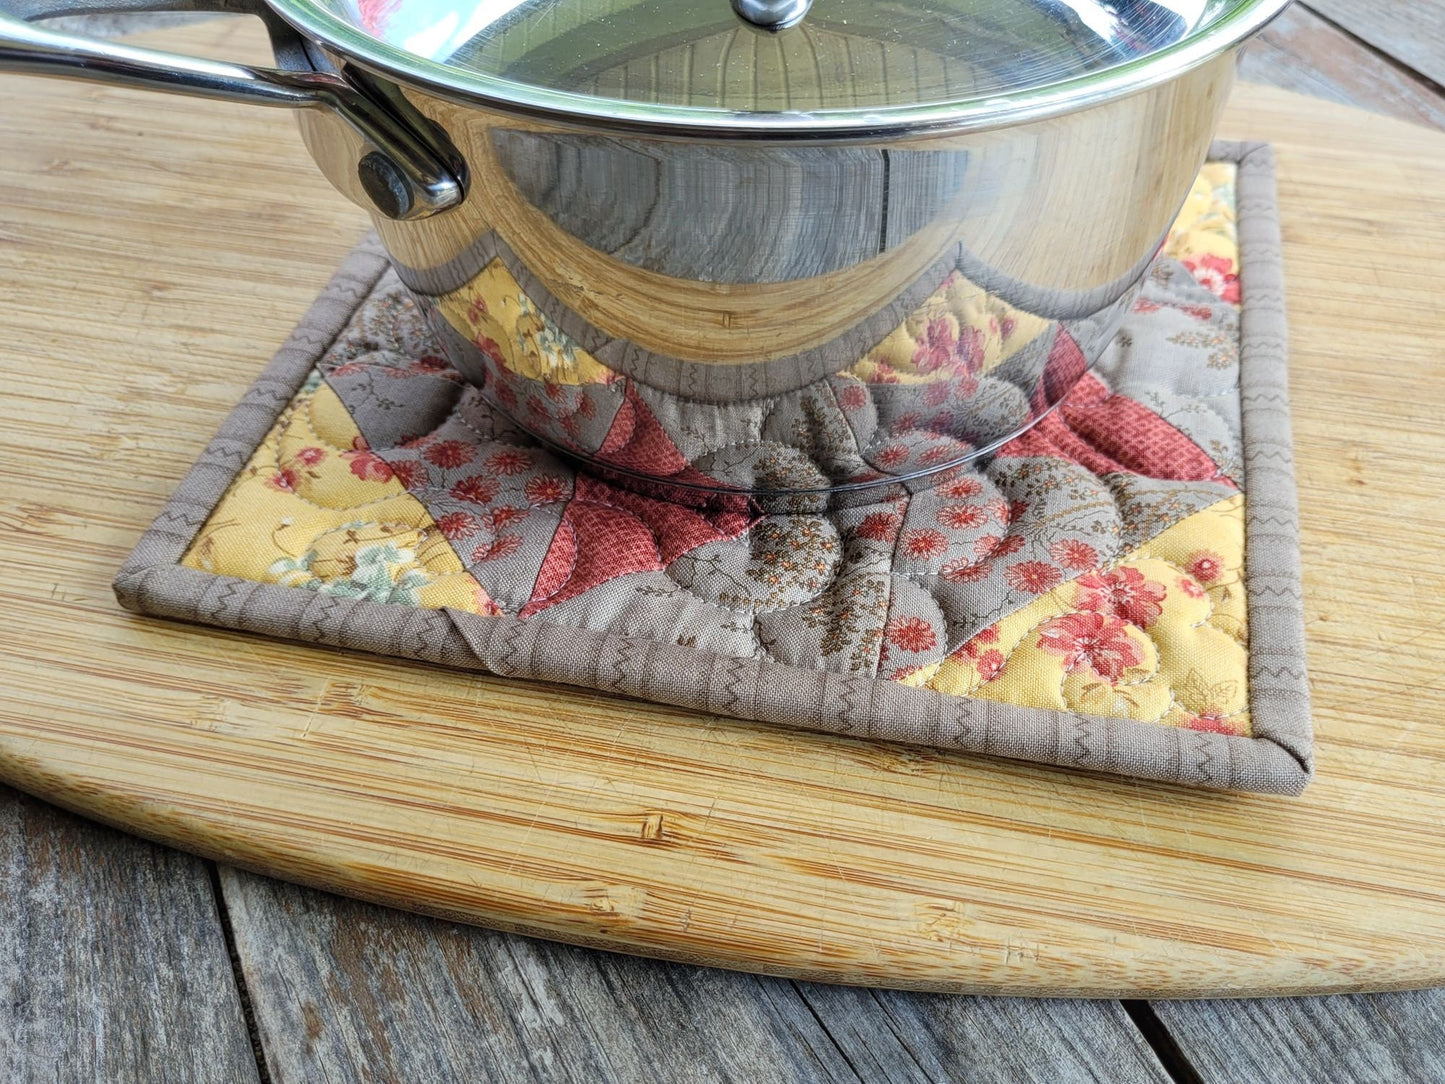 quilted hot mat under a small size saucepan